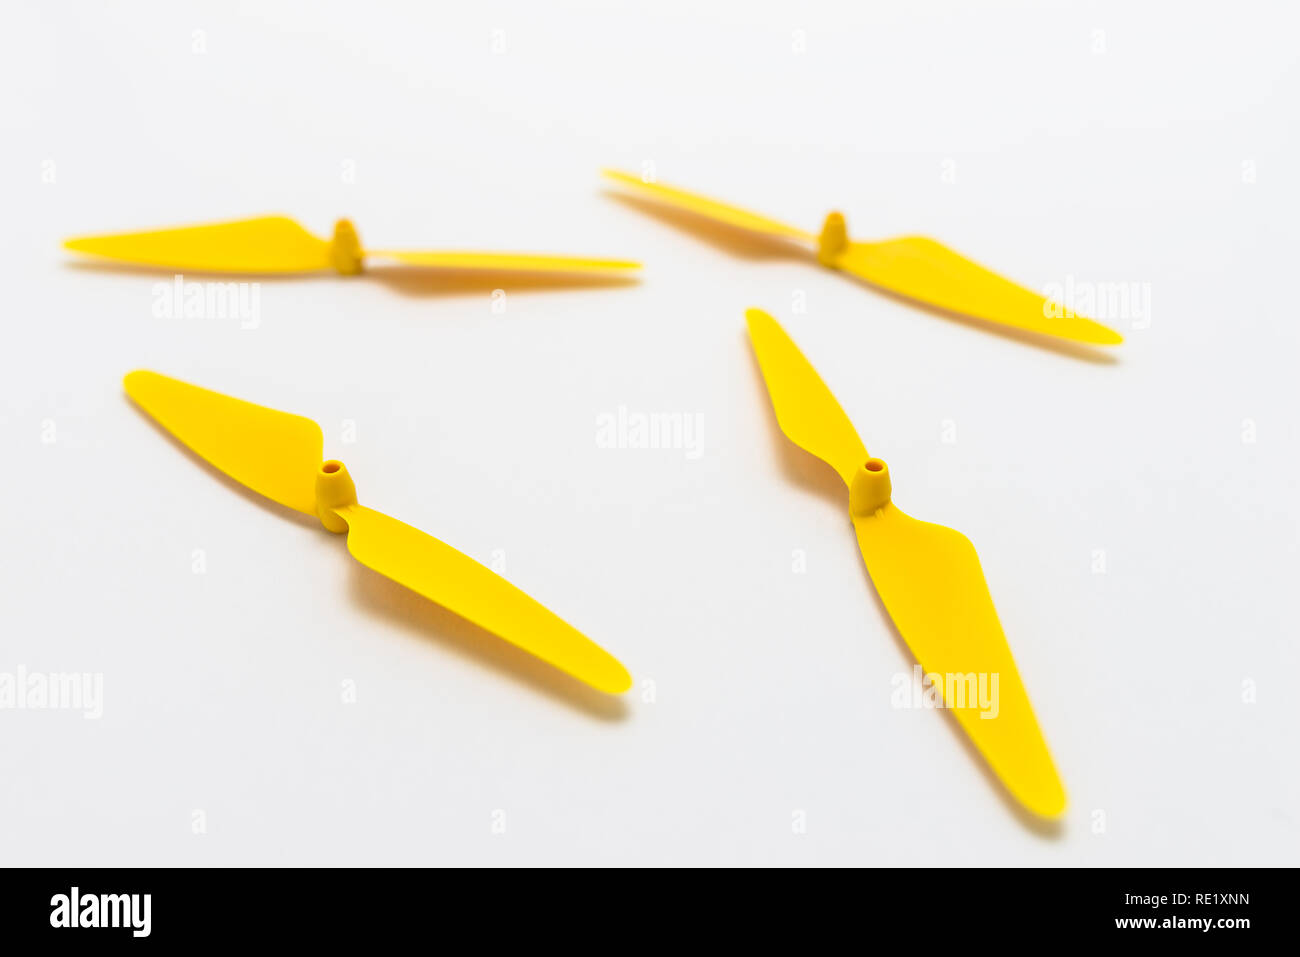 Yellow, plastic propellers for a quadcopter drone, isolated on white background. Stock Photo